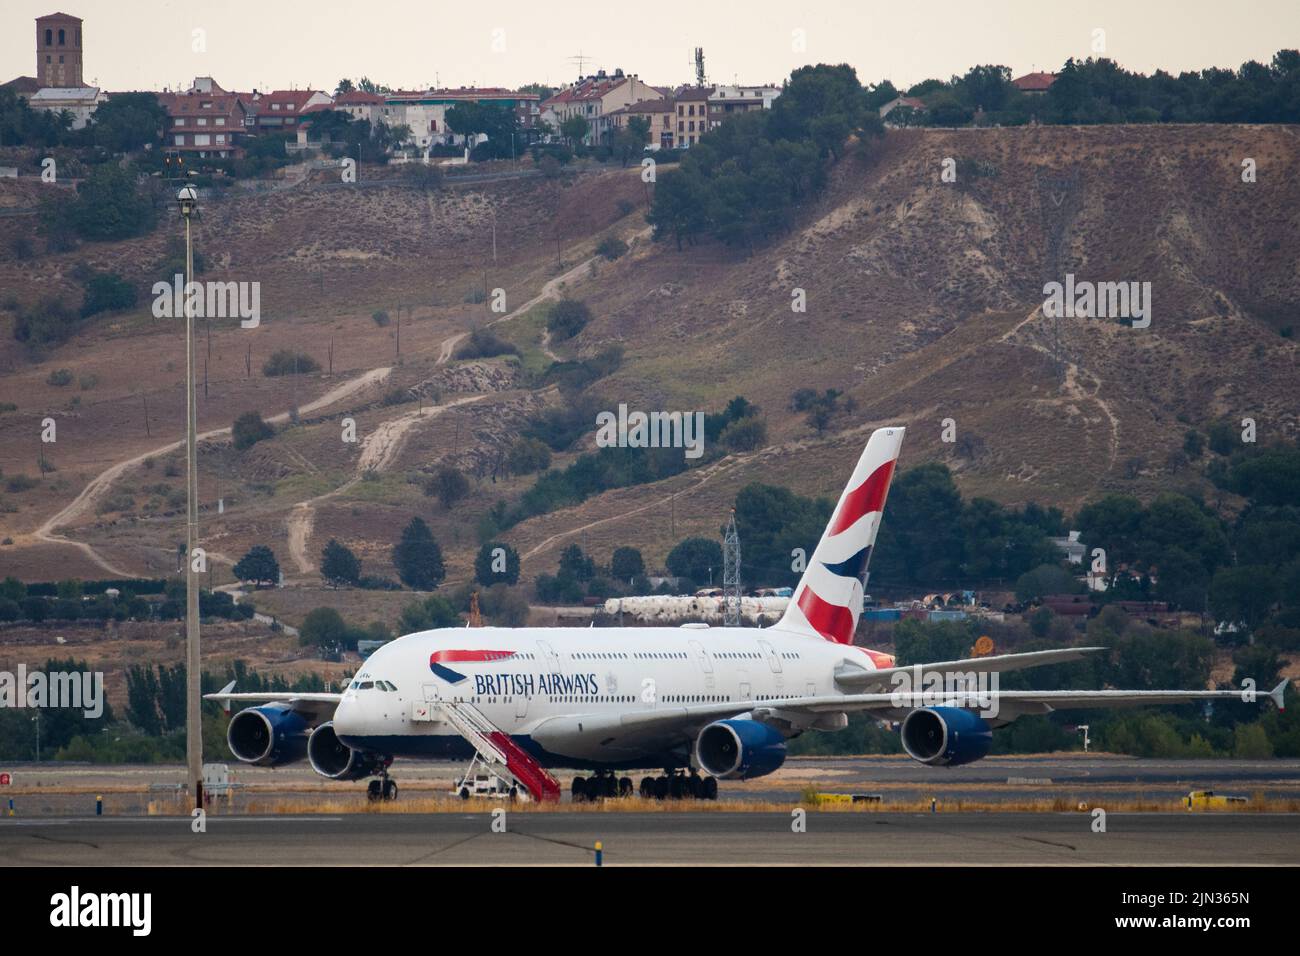 An Airbus 380 airplane of British Airways in seen on the runway at Adolfo Suarez Madrid Barajas Airport. Stock Photo